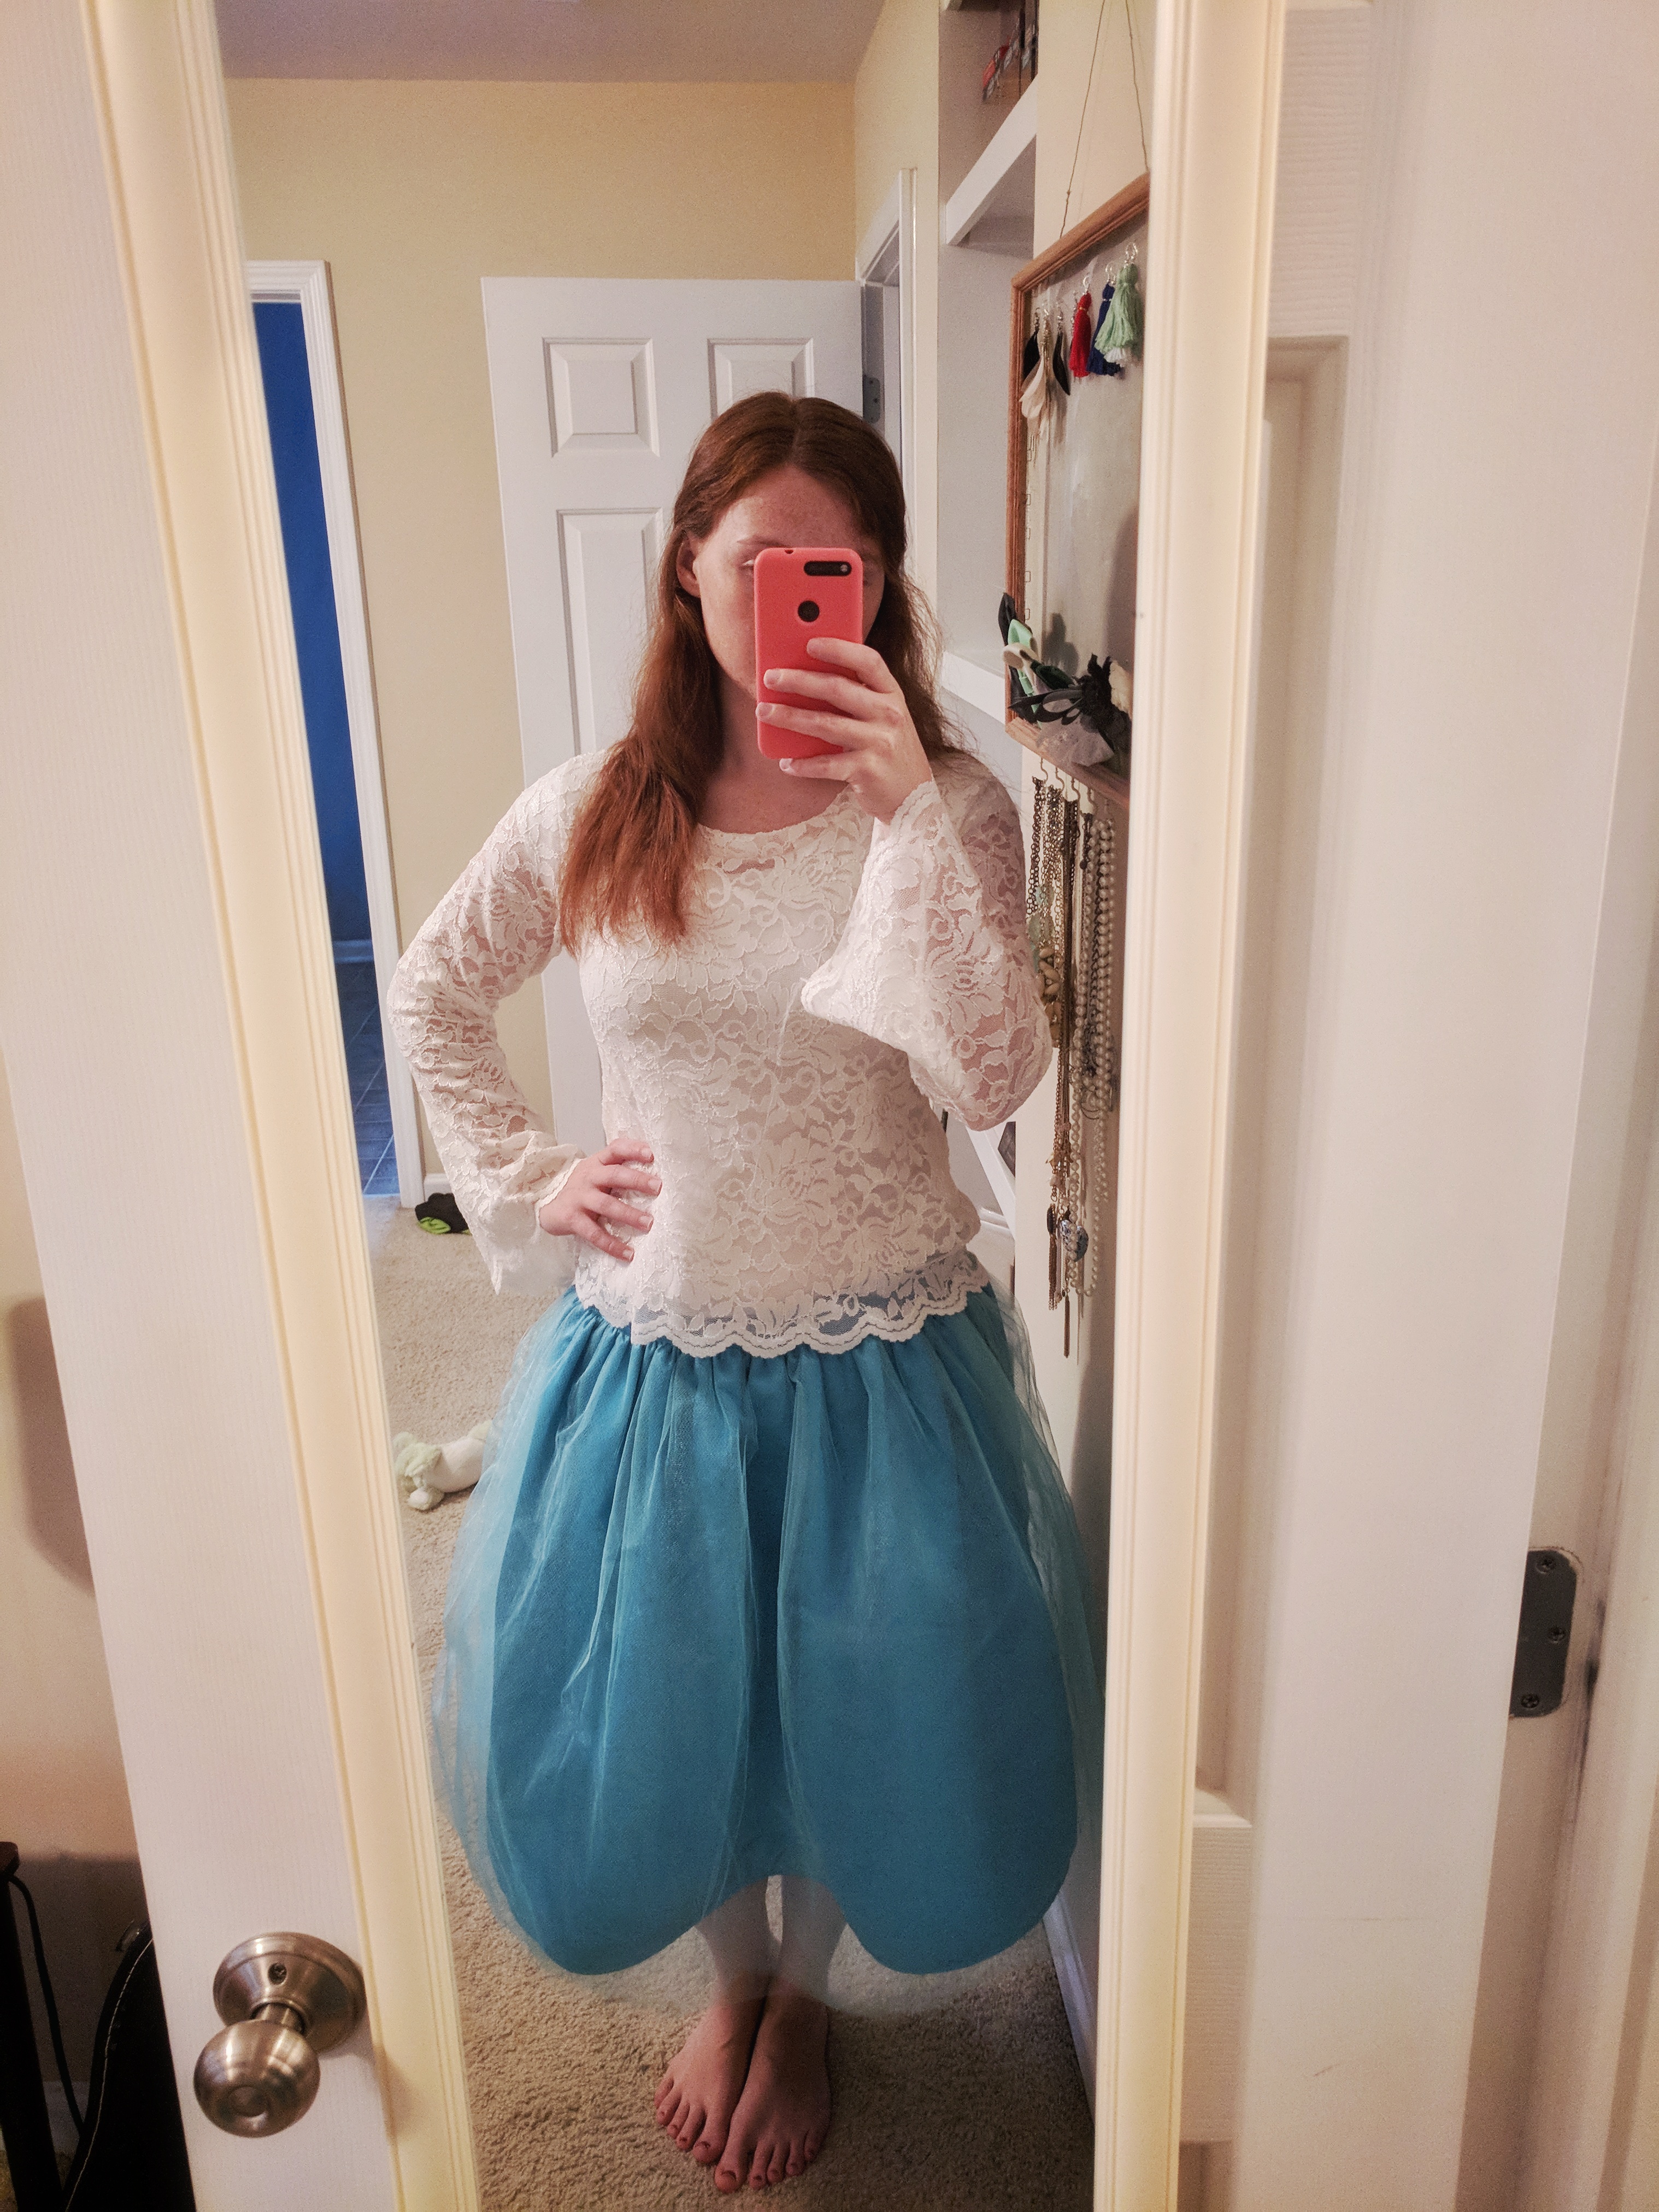 Blue tulle skirt paired with lace shirt